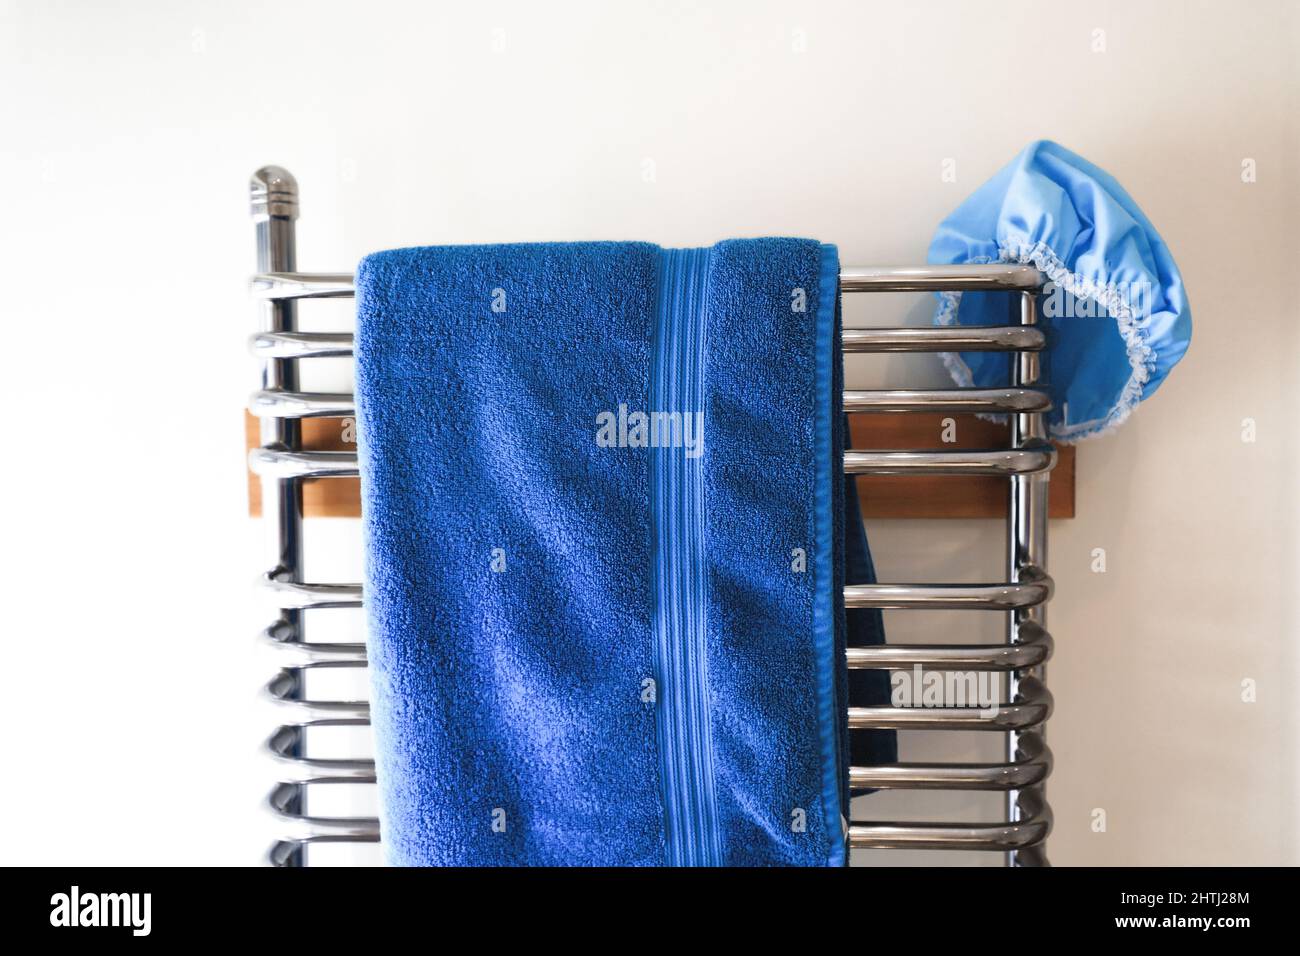 Blue towel and shower cap, hanging on a chrome ladder radiator. Stock Photo